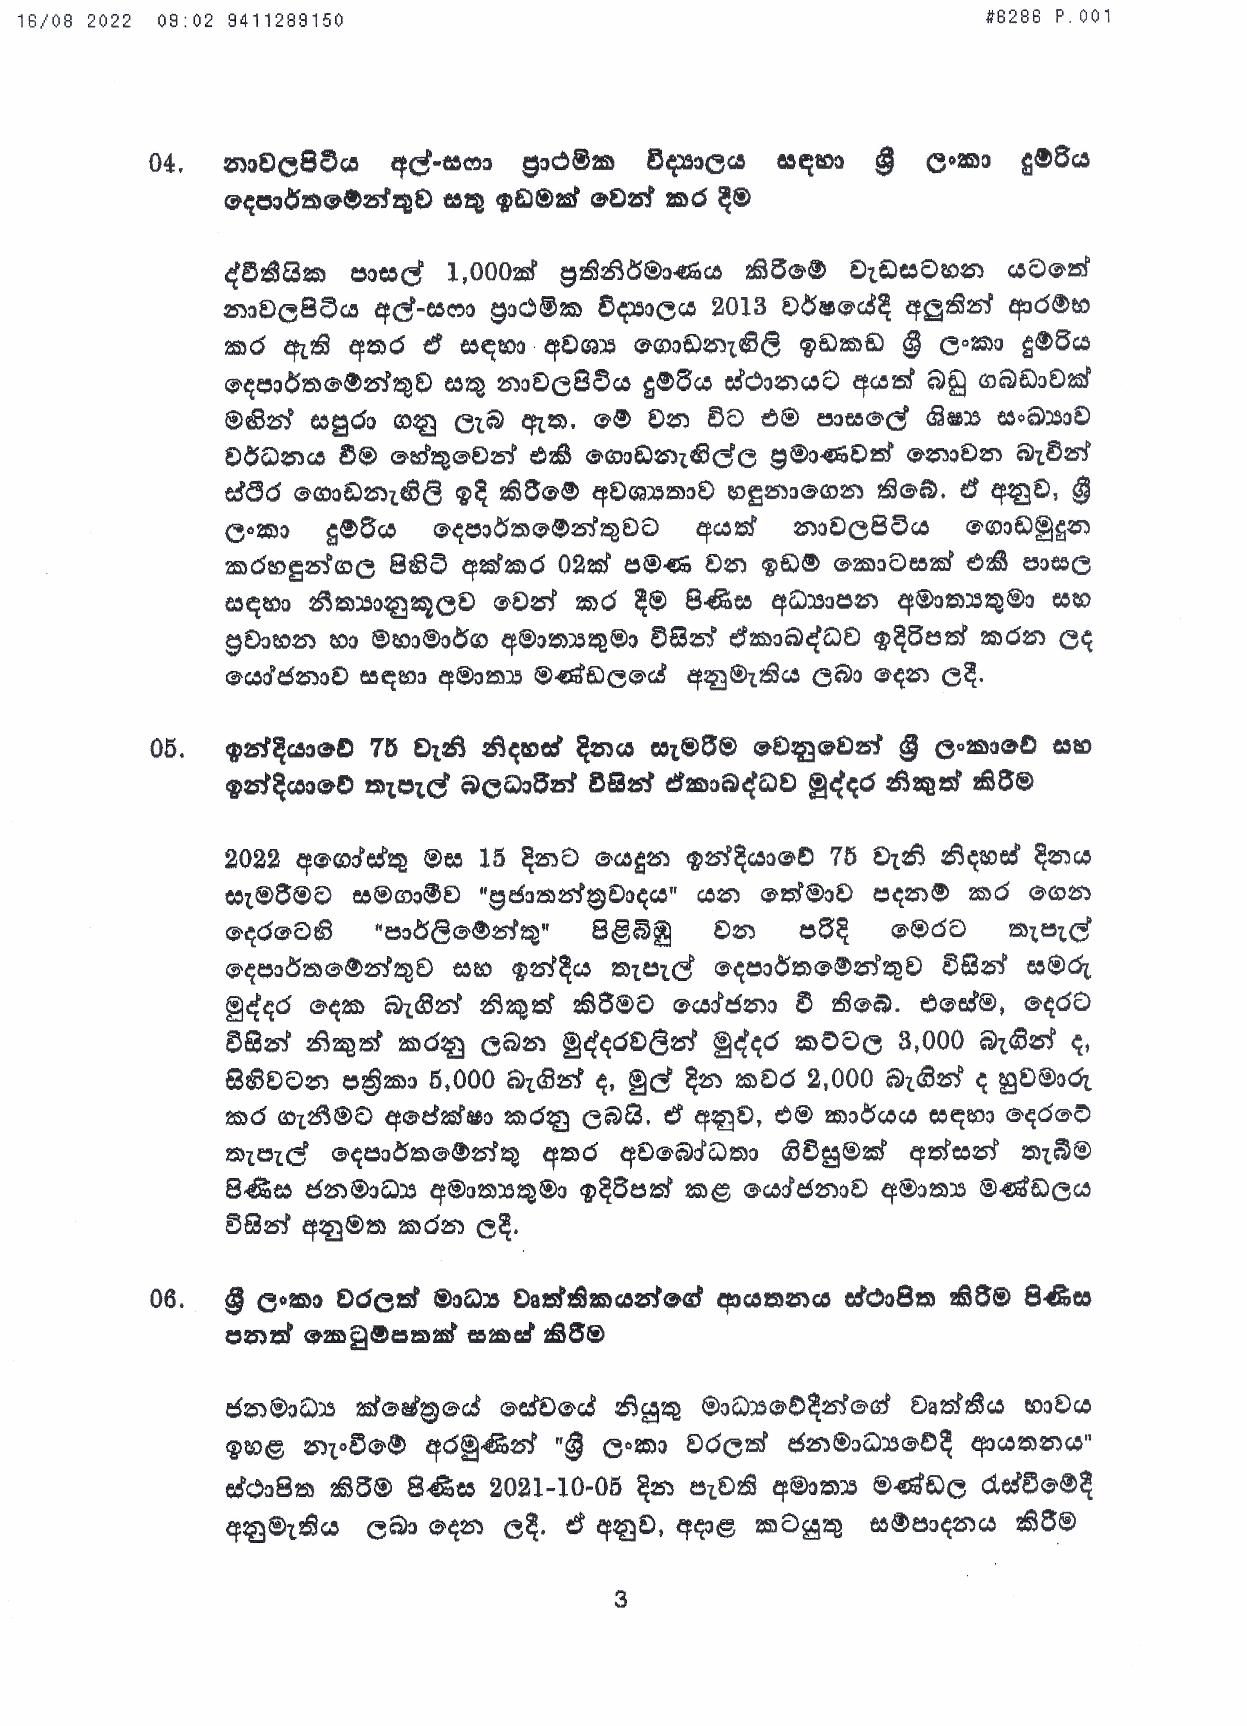 Cabinet Decision on 15.08.2022 page 003